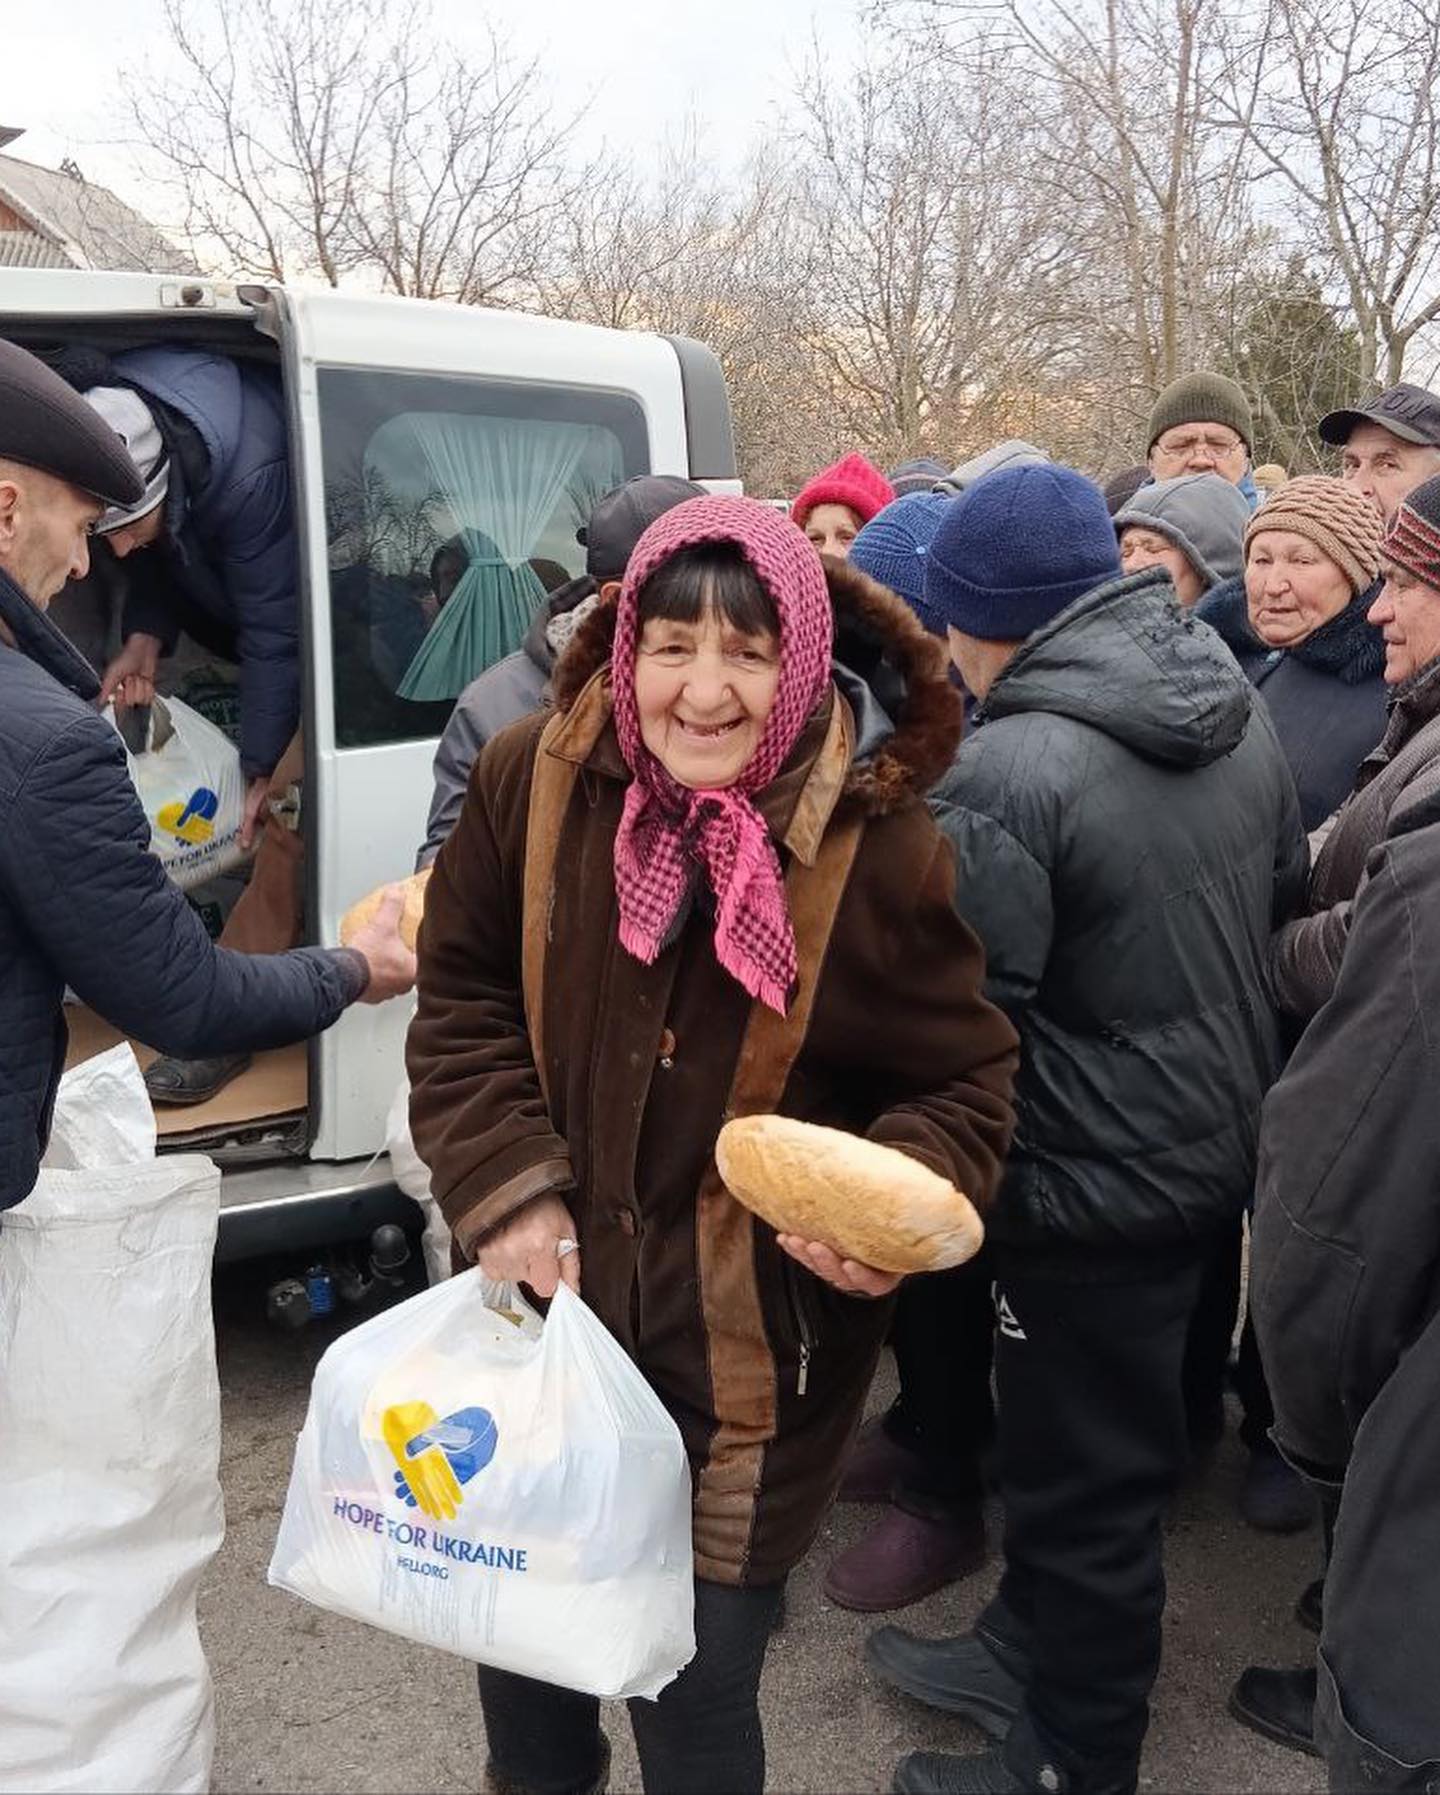 An elderly woman in a brown coat and pink headscarf smiles while receiving bread and supplies from a volunteer. a van marked "hope for ukraine" is visible in the background.